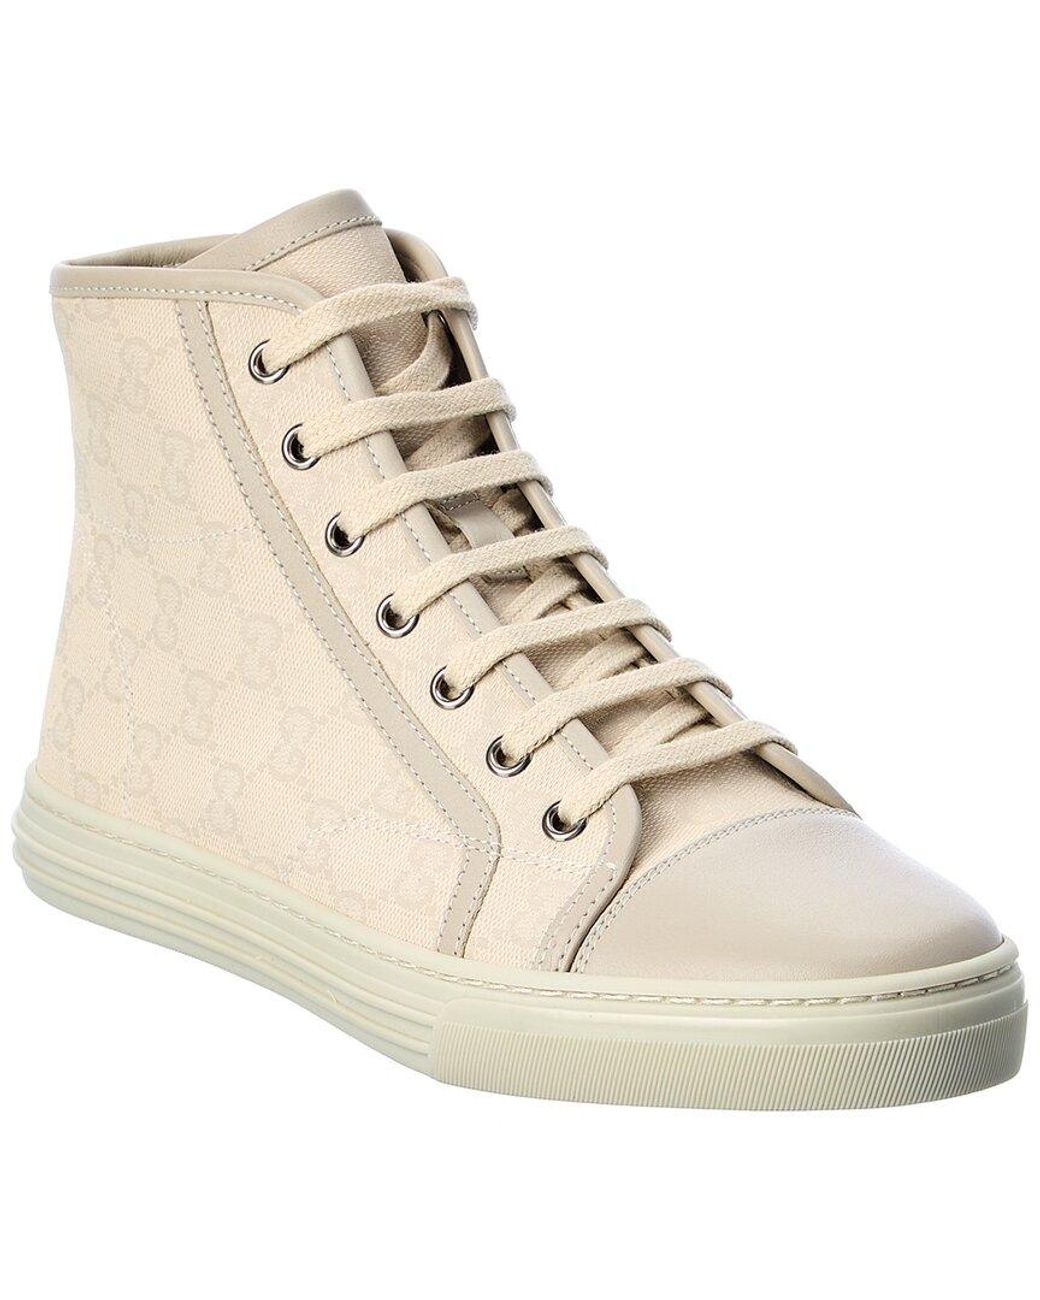 Gucci GG Canvas & Leather High-top Sneaker in Natural | Lyst